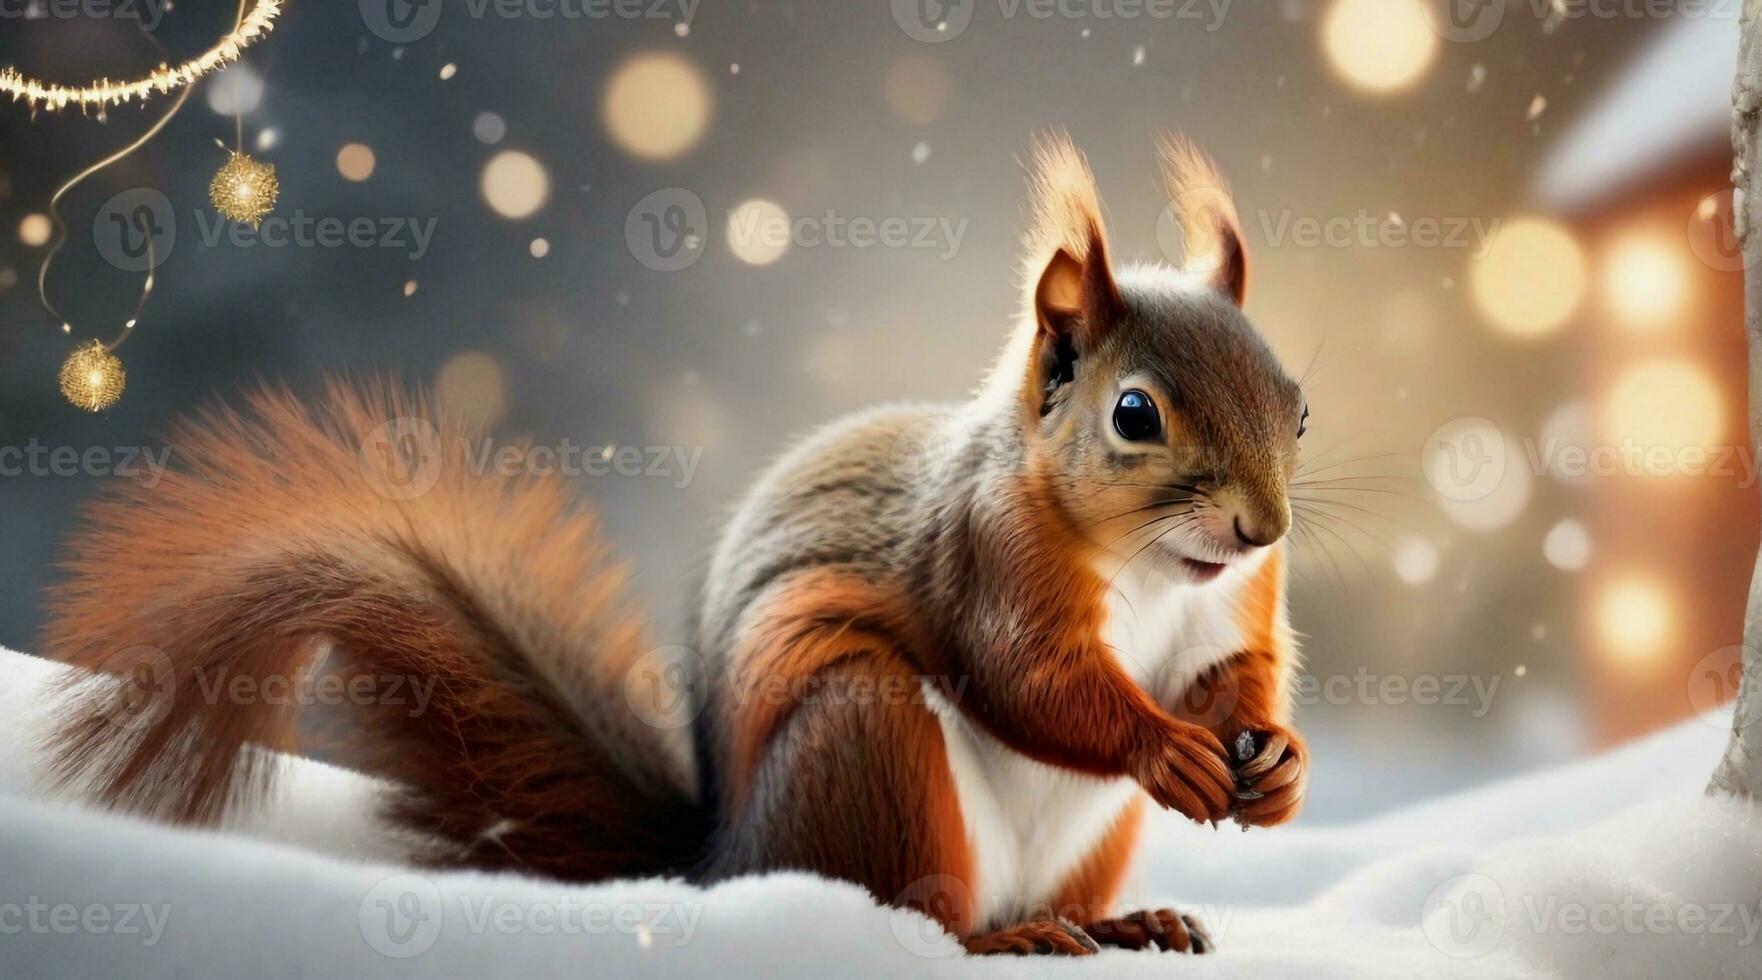 Cute squirrel couple playing against New Year's eve day ambience background with space for text, background image, AI generated photo